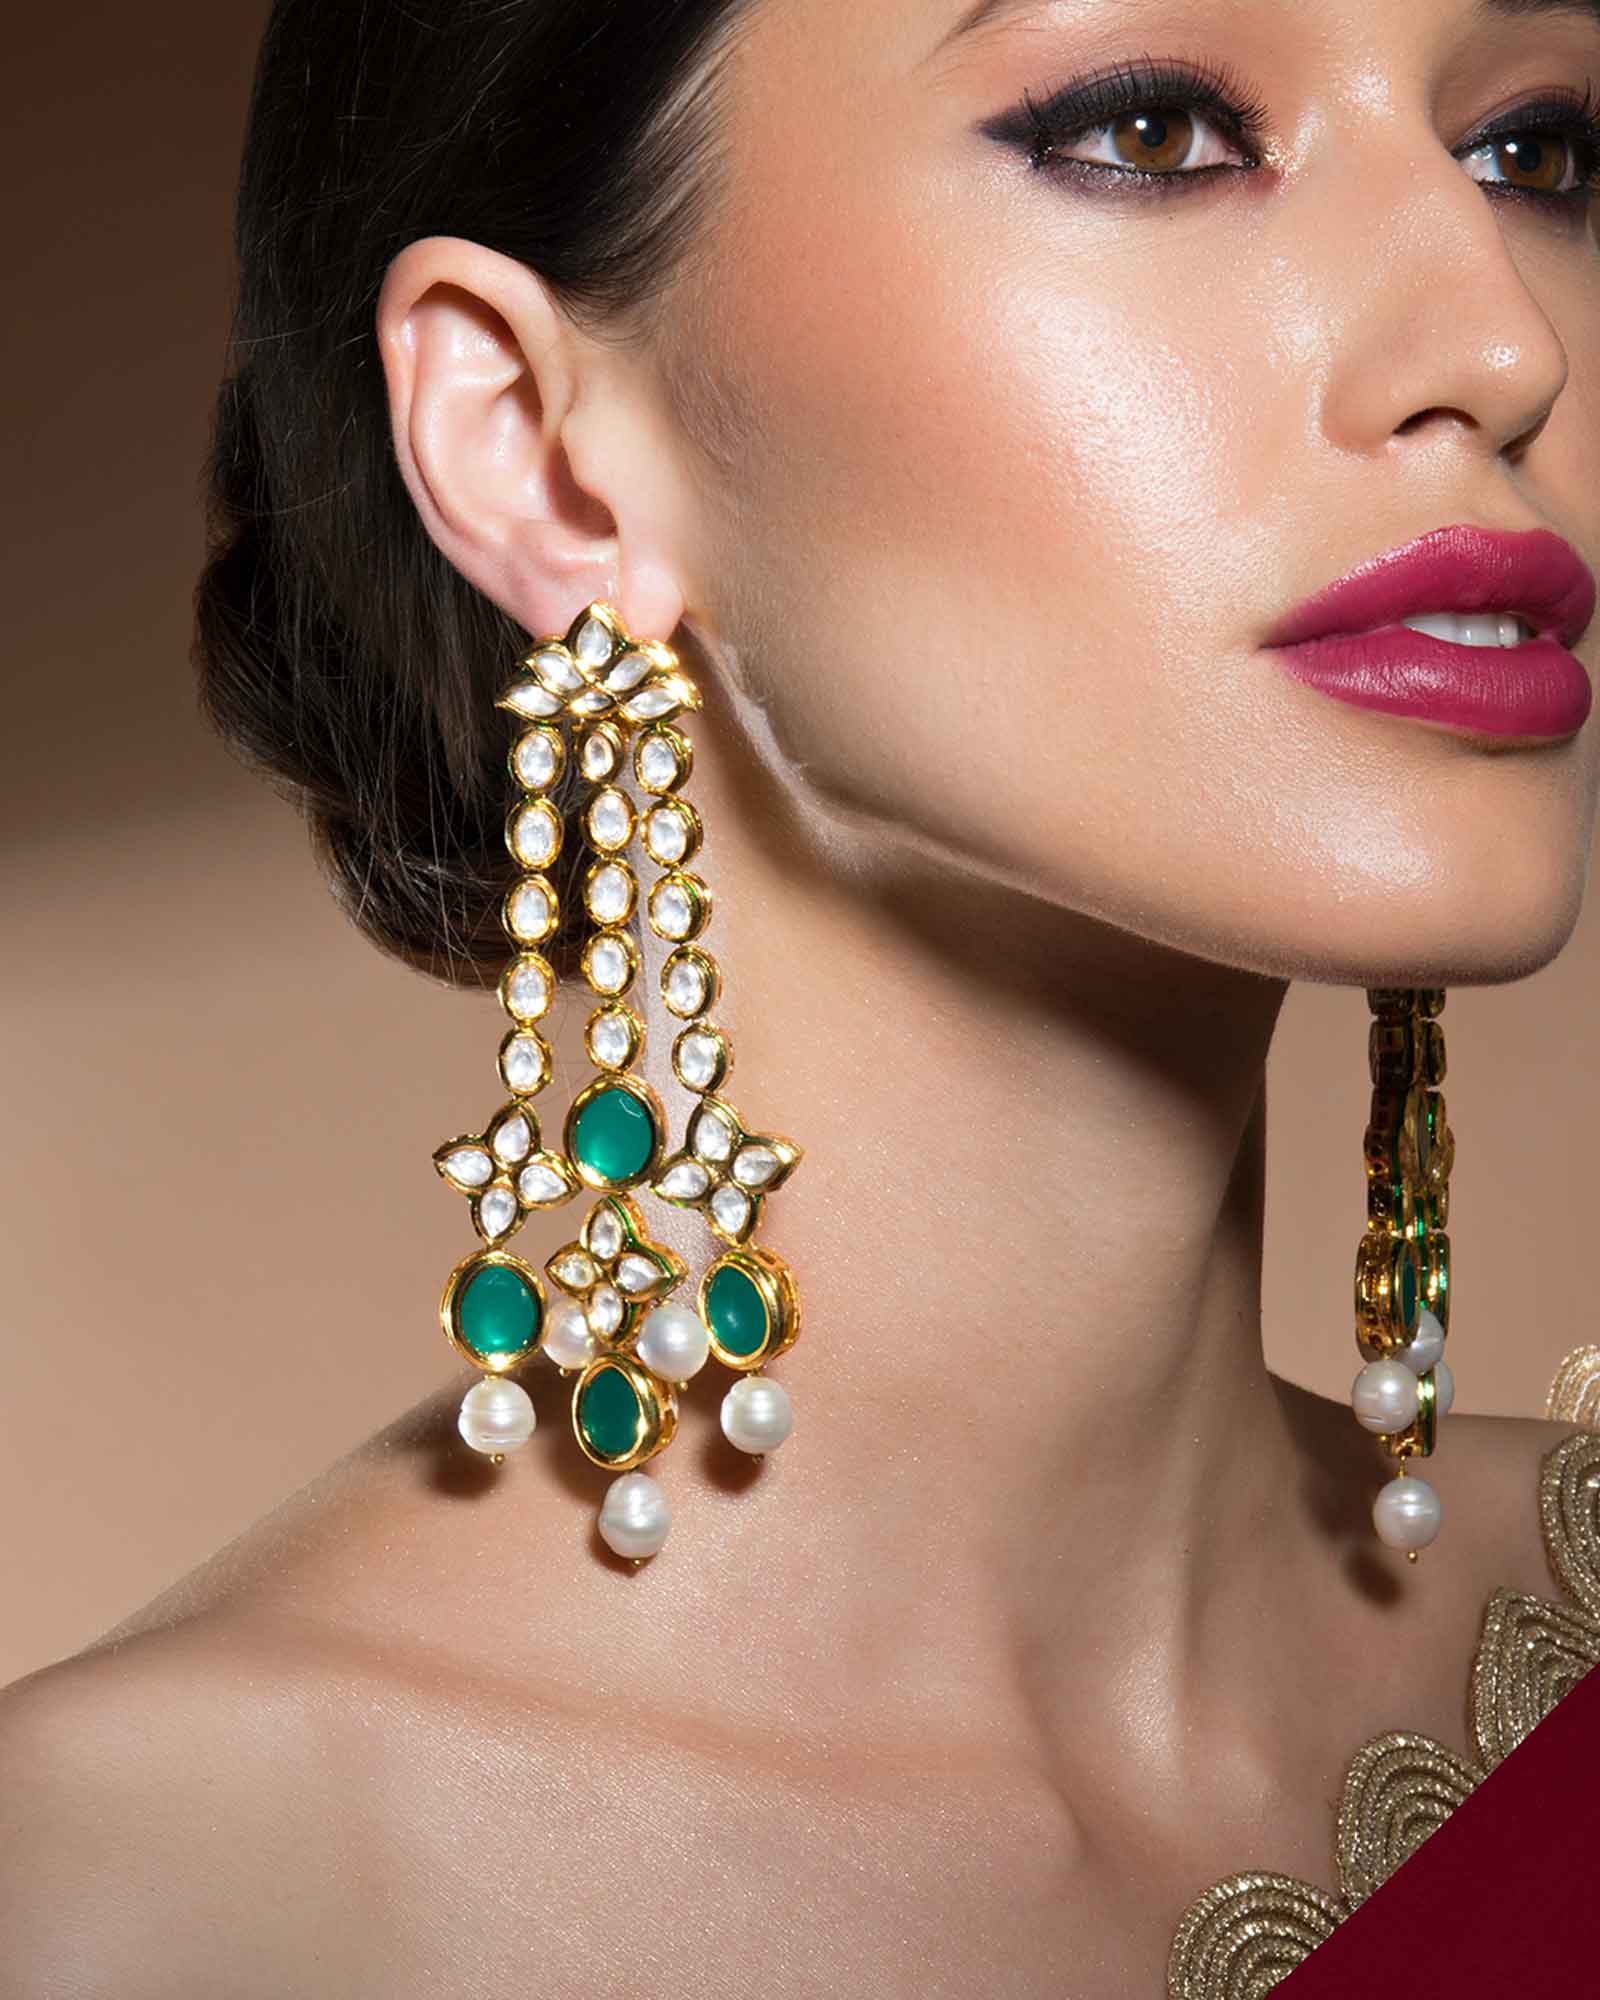 Classic Kundan Polki Gold Enamelled Earrings Studded With Baroque Pearls And Glimmering Quartz